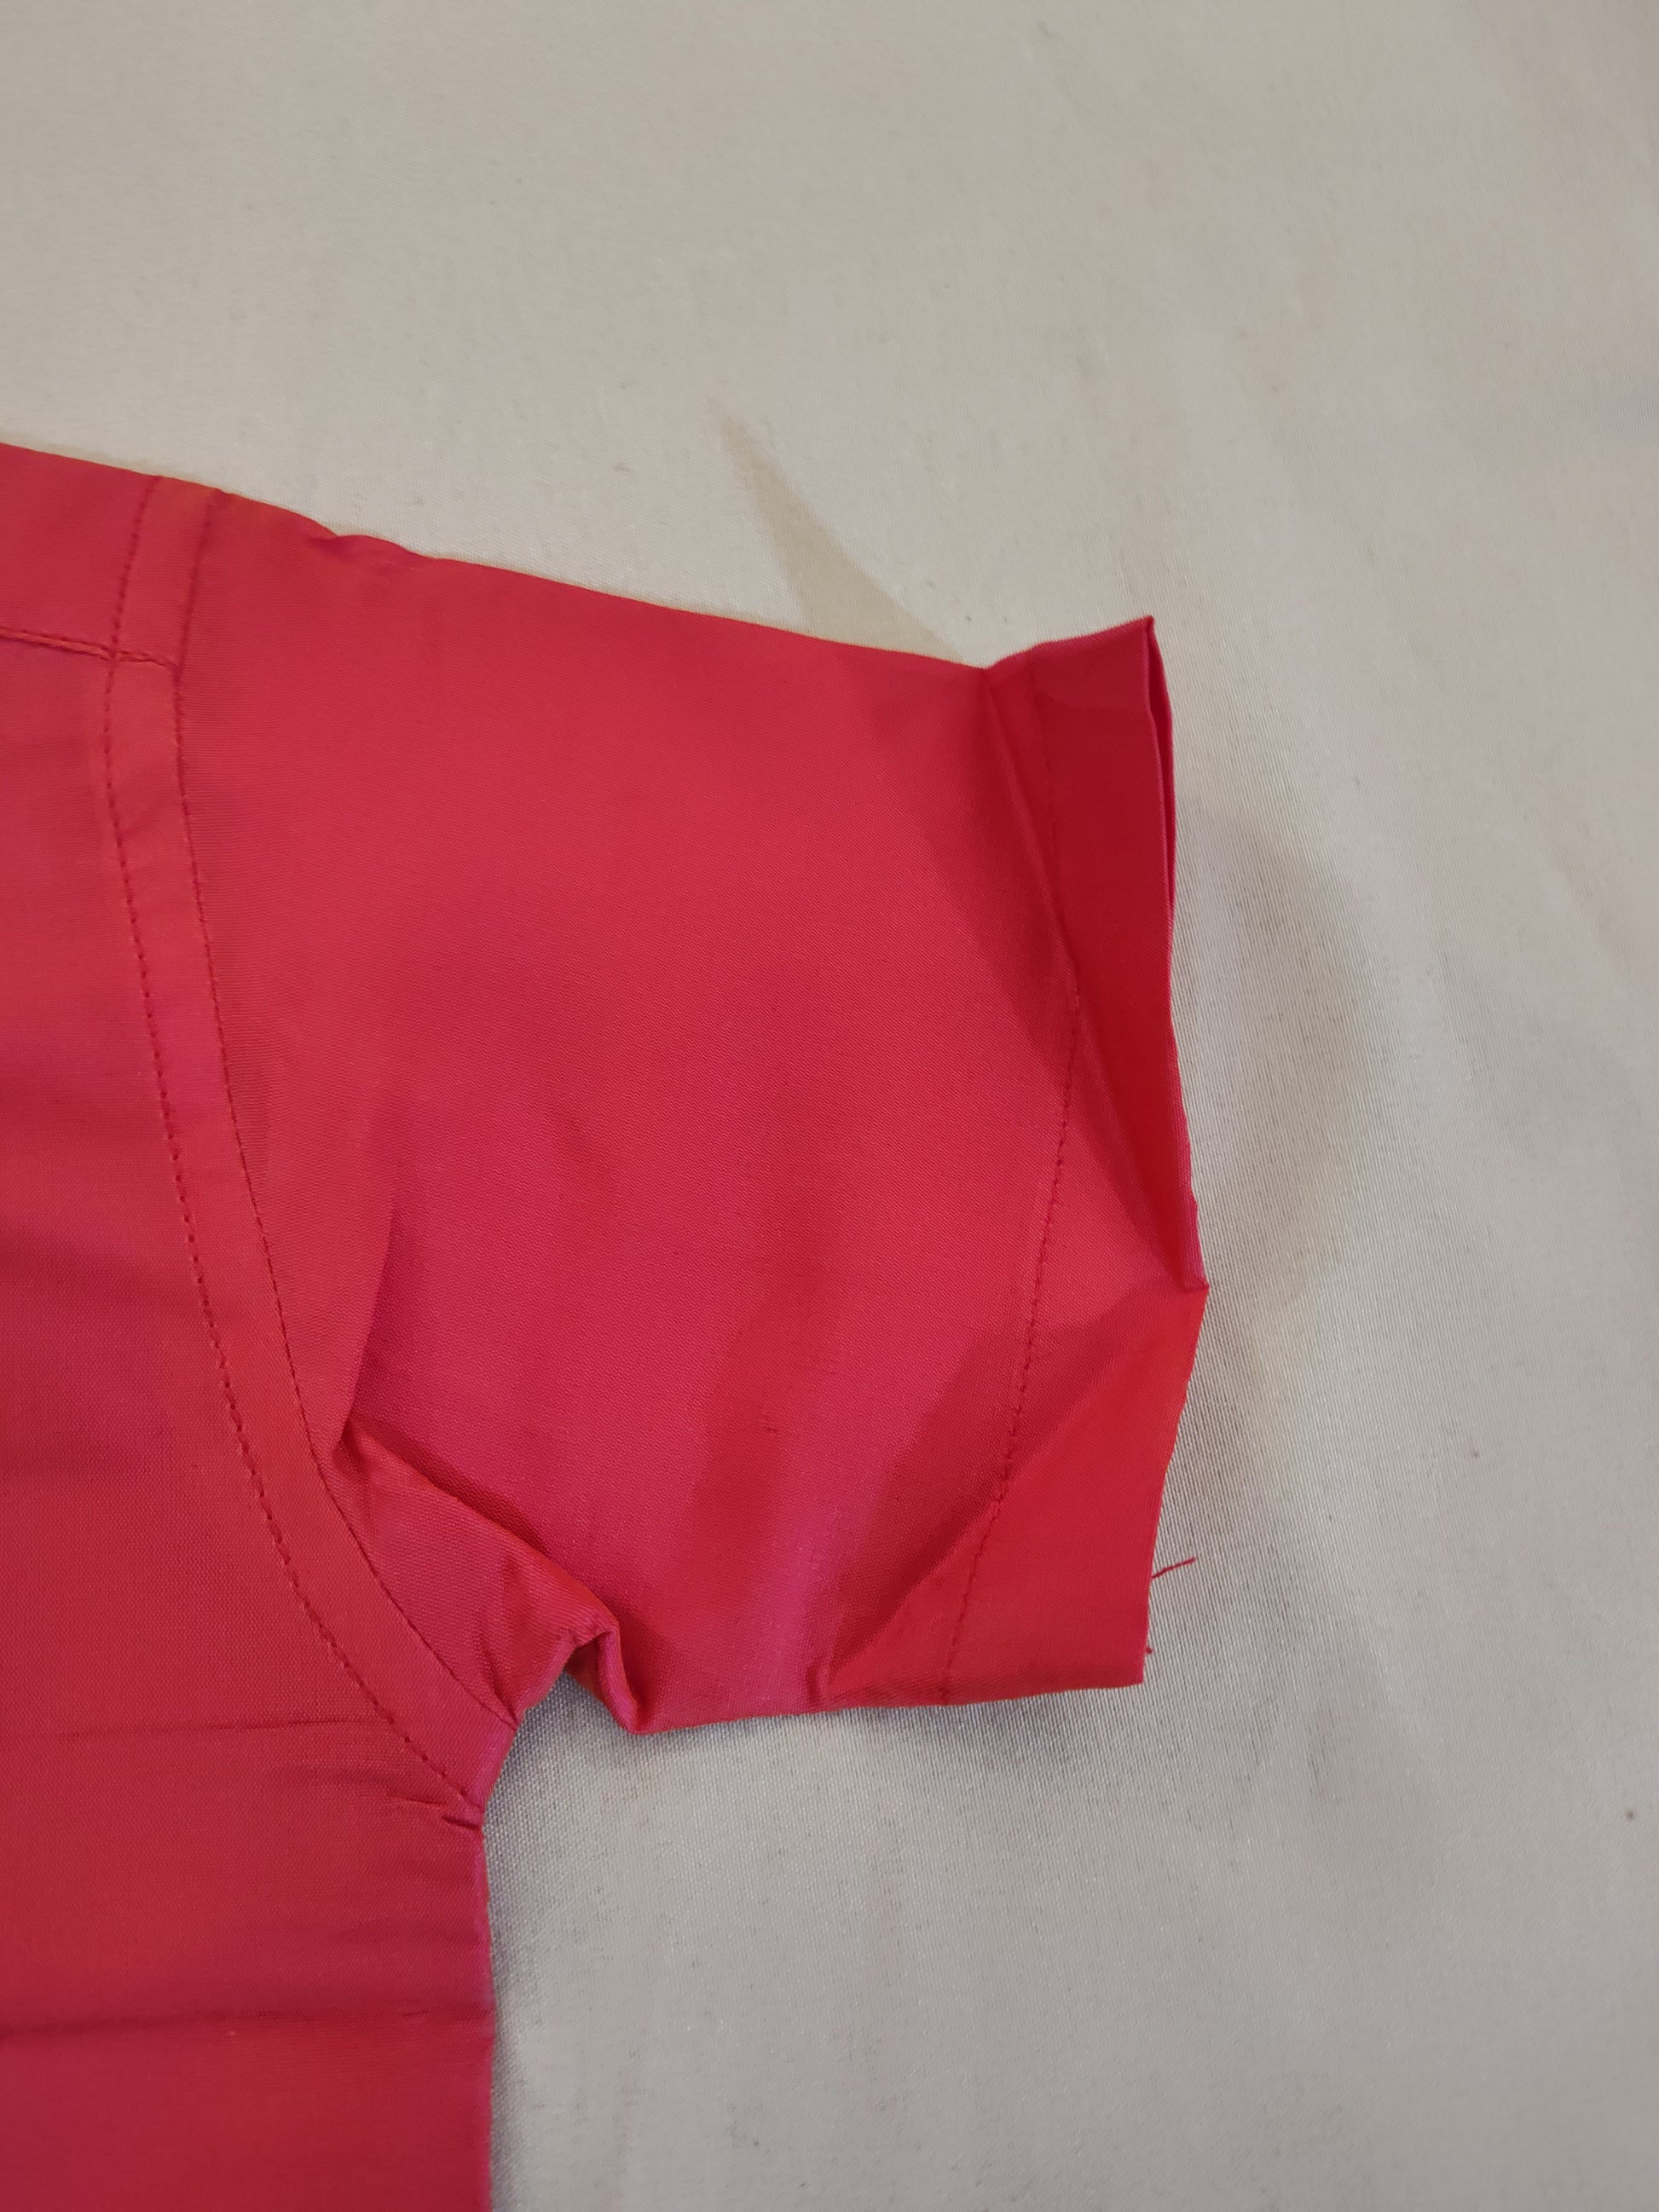 Charming Pink Color Dhoti Sets In Yuma 